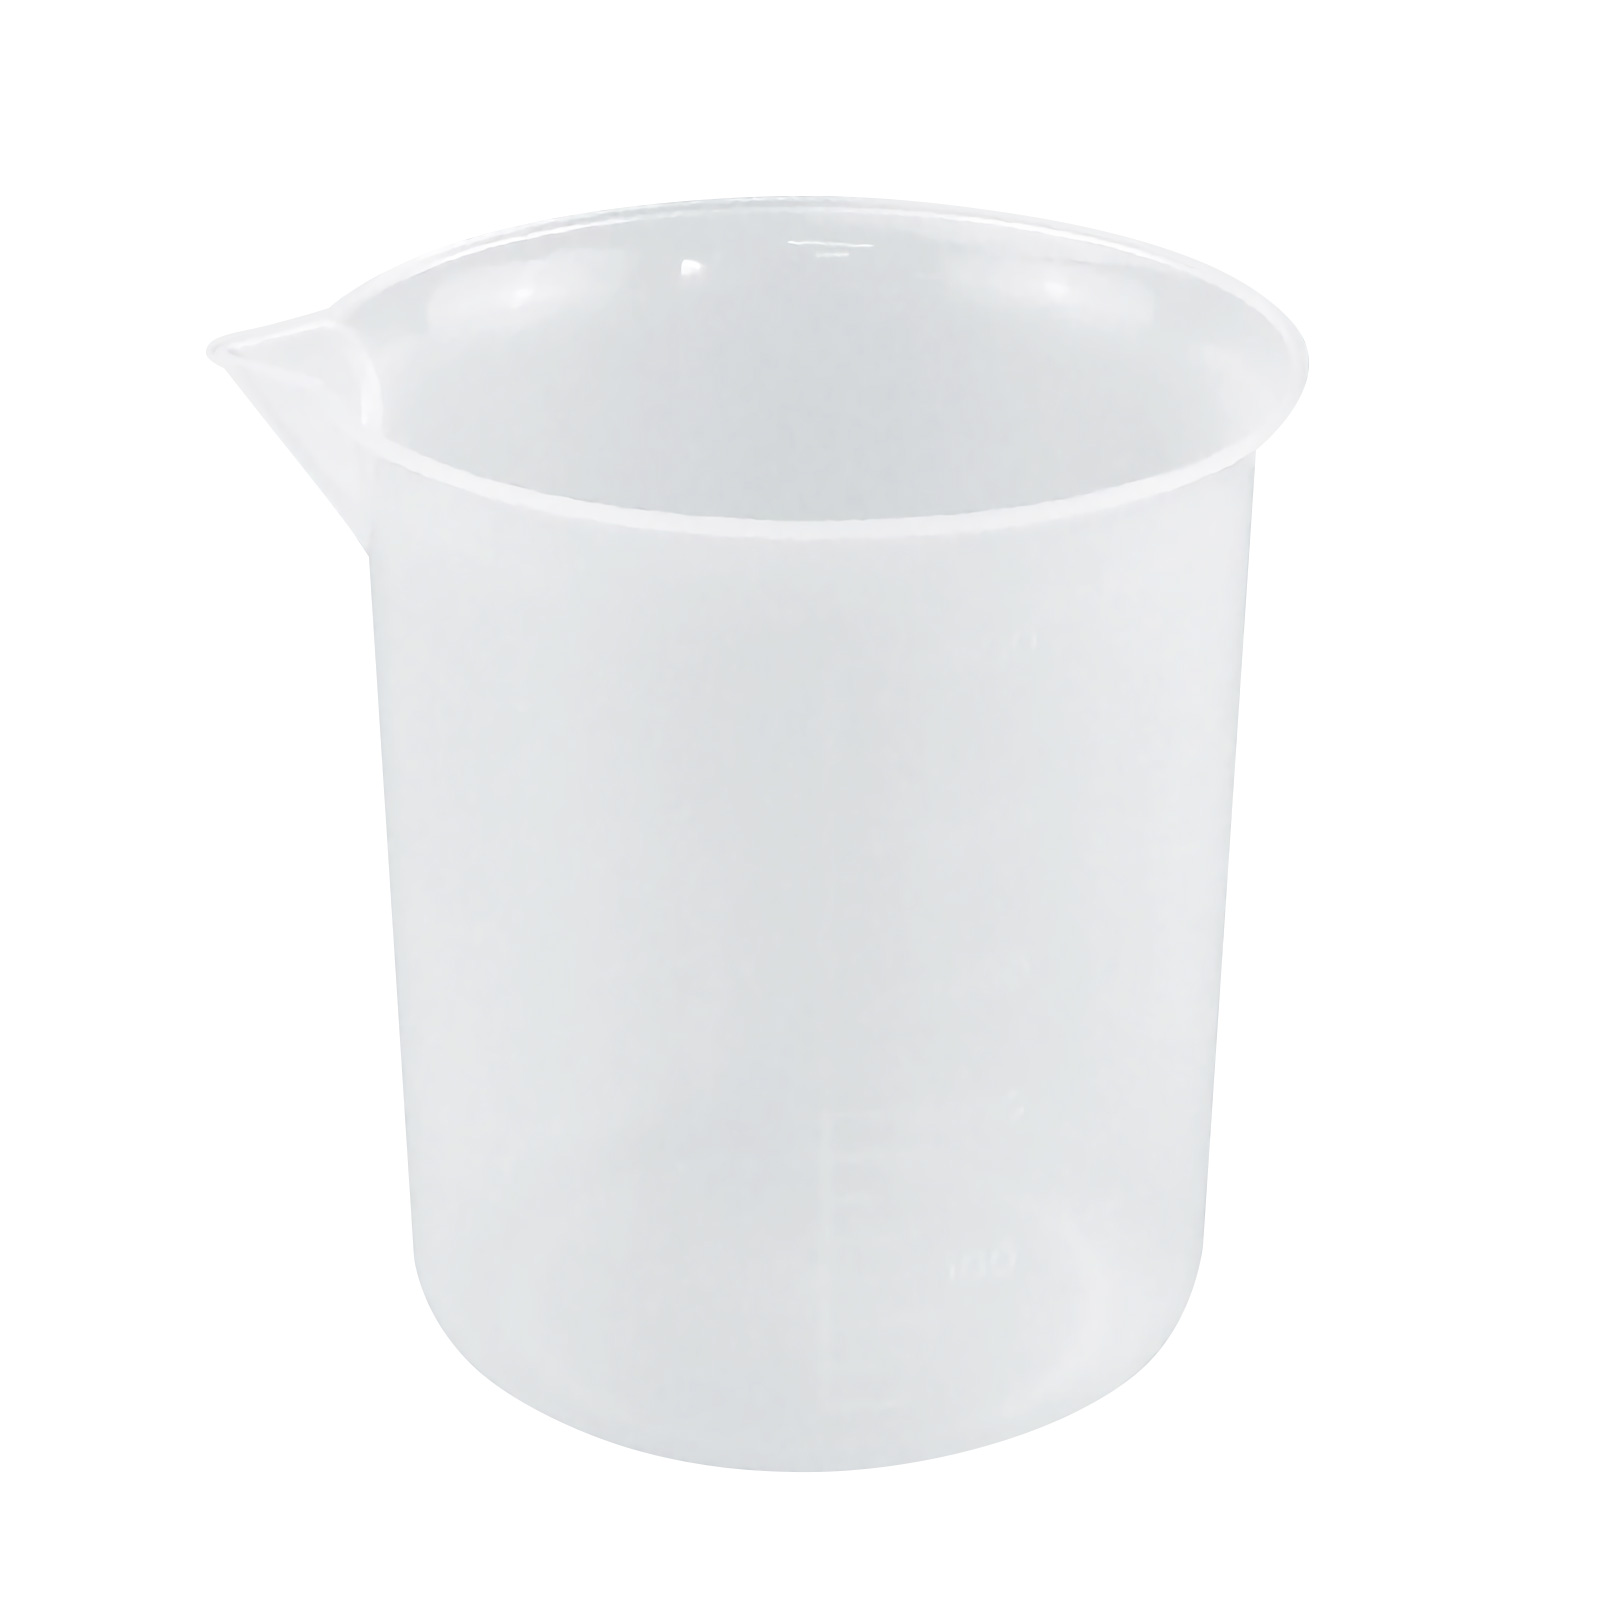 ADAMAS-BETA Lab Graduated PP Plastic Beaker Olecranon Outlet without Handle 250ml 1000ml Clear Laboratory Measuring Cup